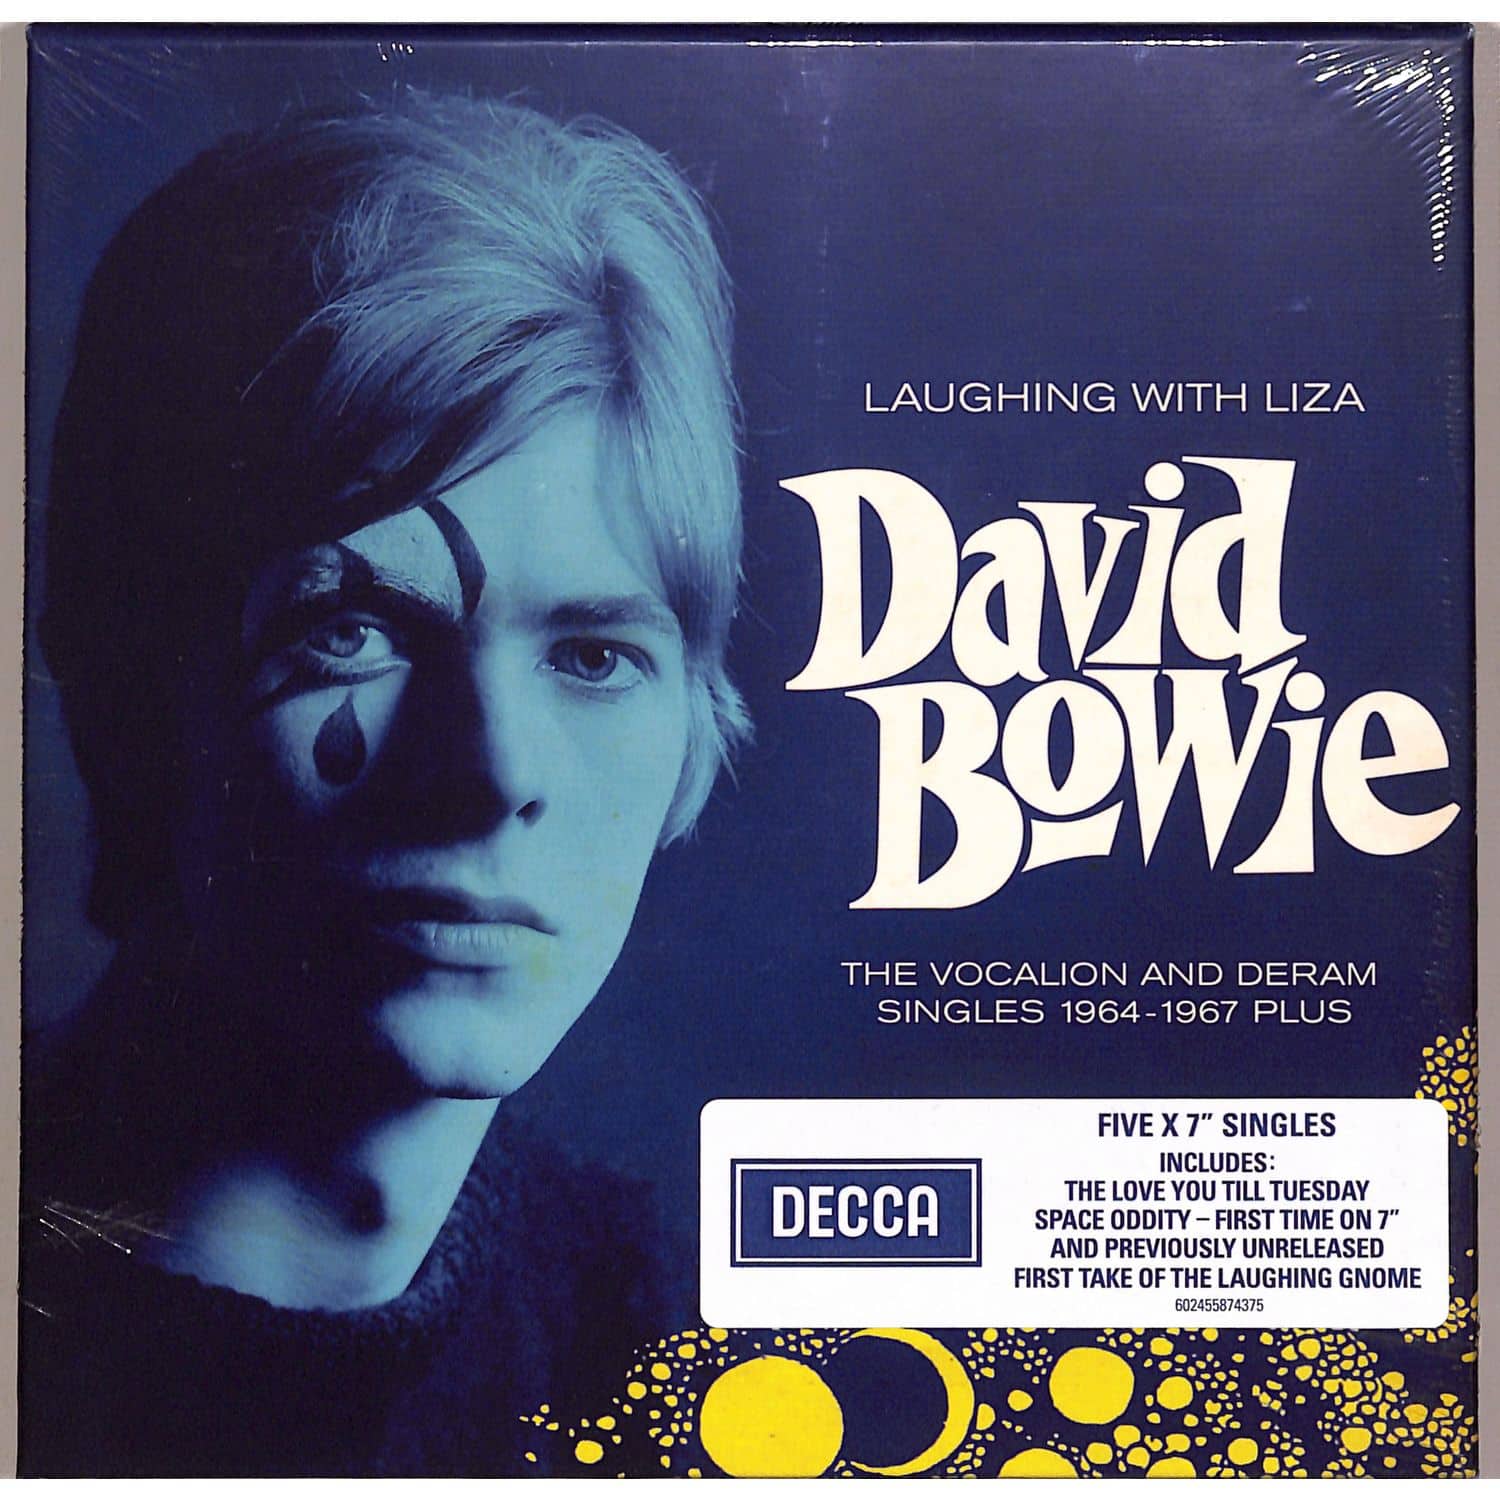 David Bowie - LAUGHING WITH LIZA 